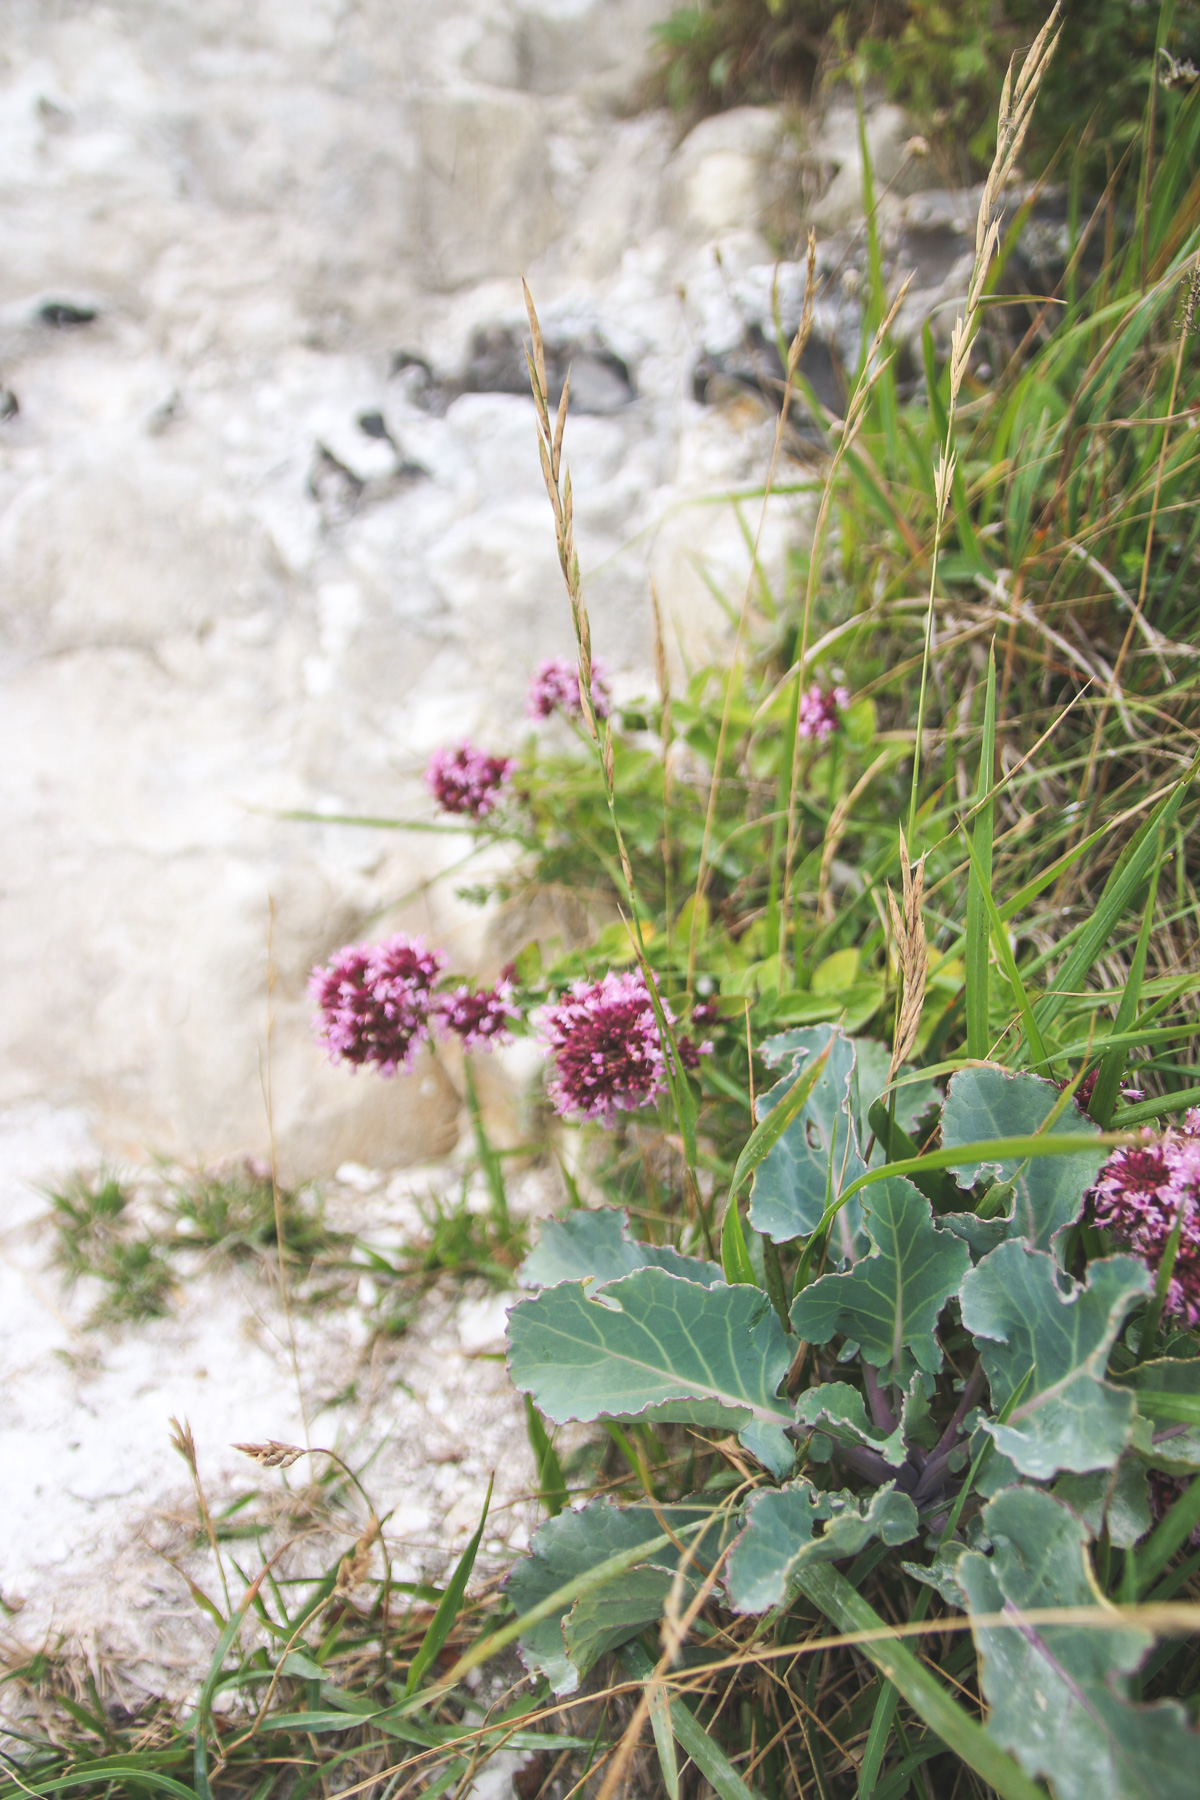 Flowers at White Cliffs of Dover